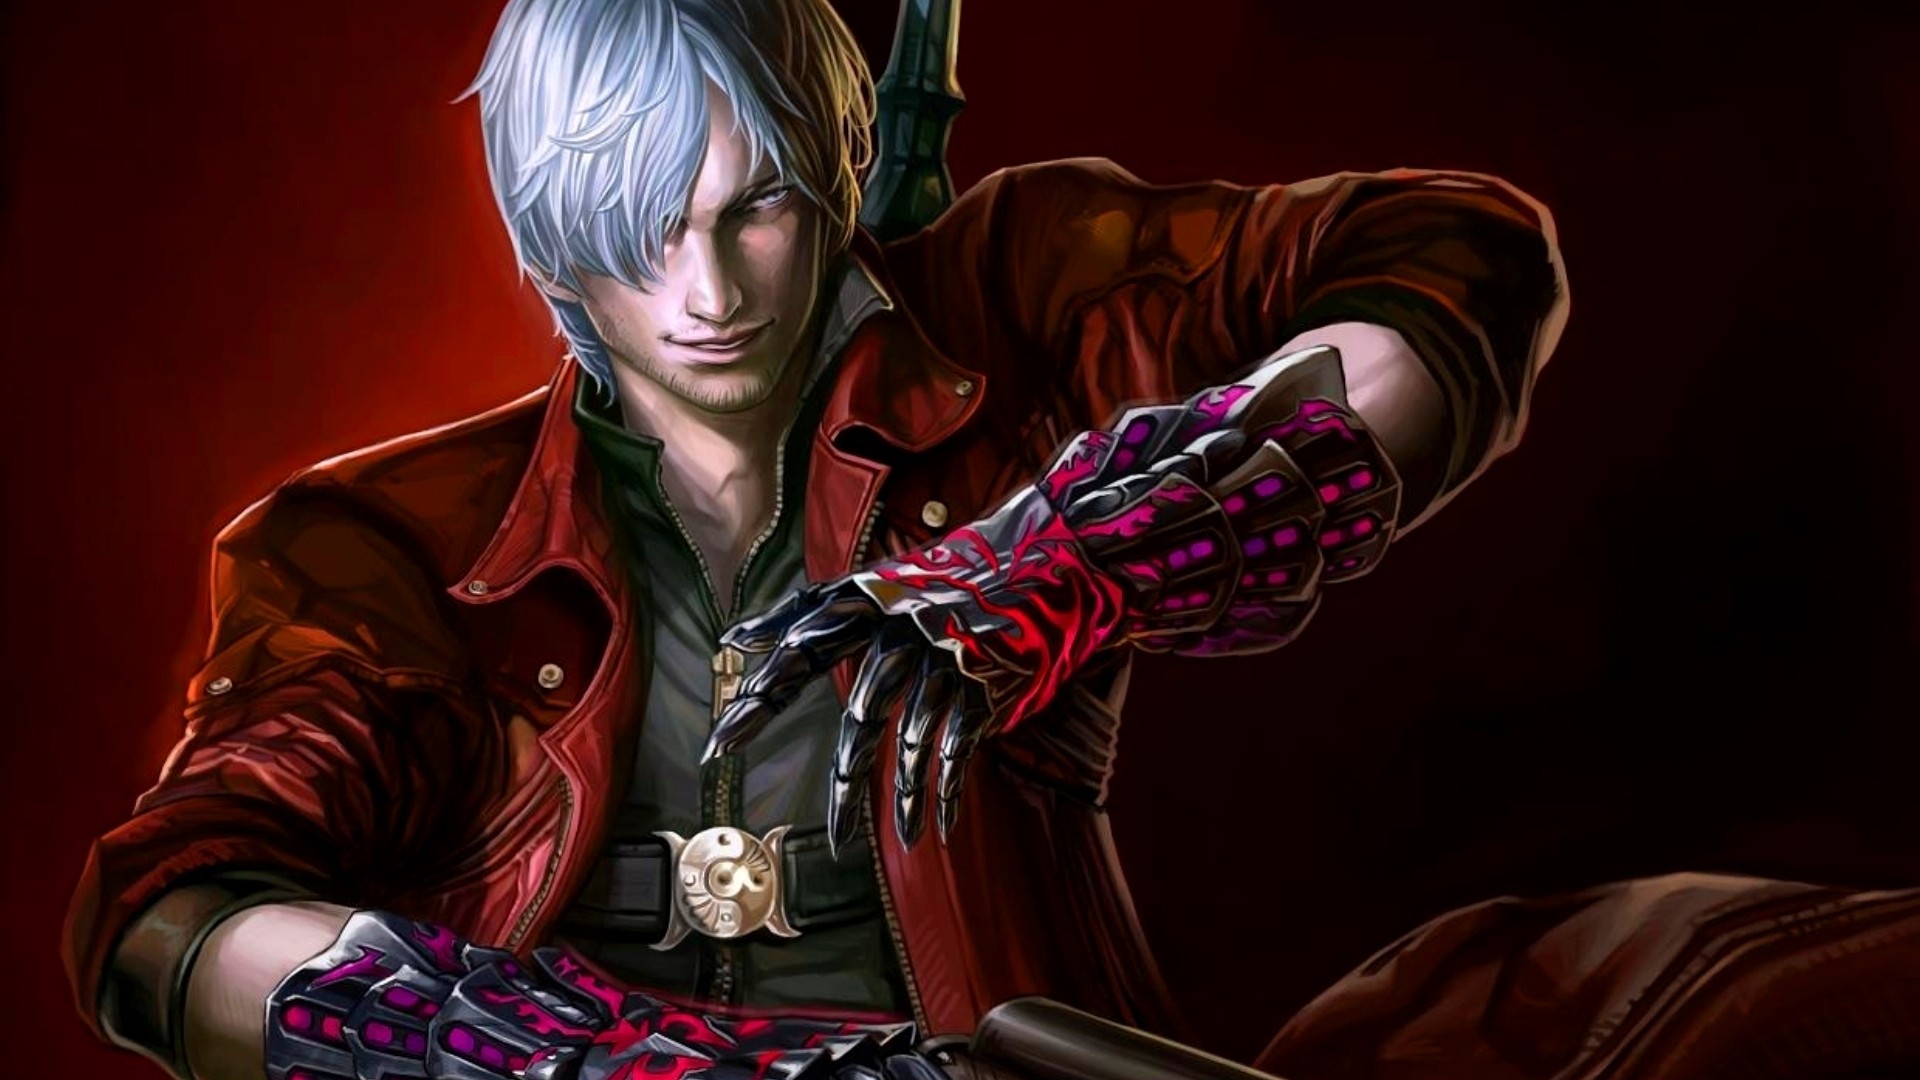 1920x1080 Devil May Cry Wallpaper 14384